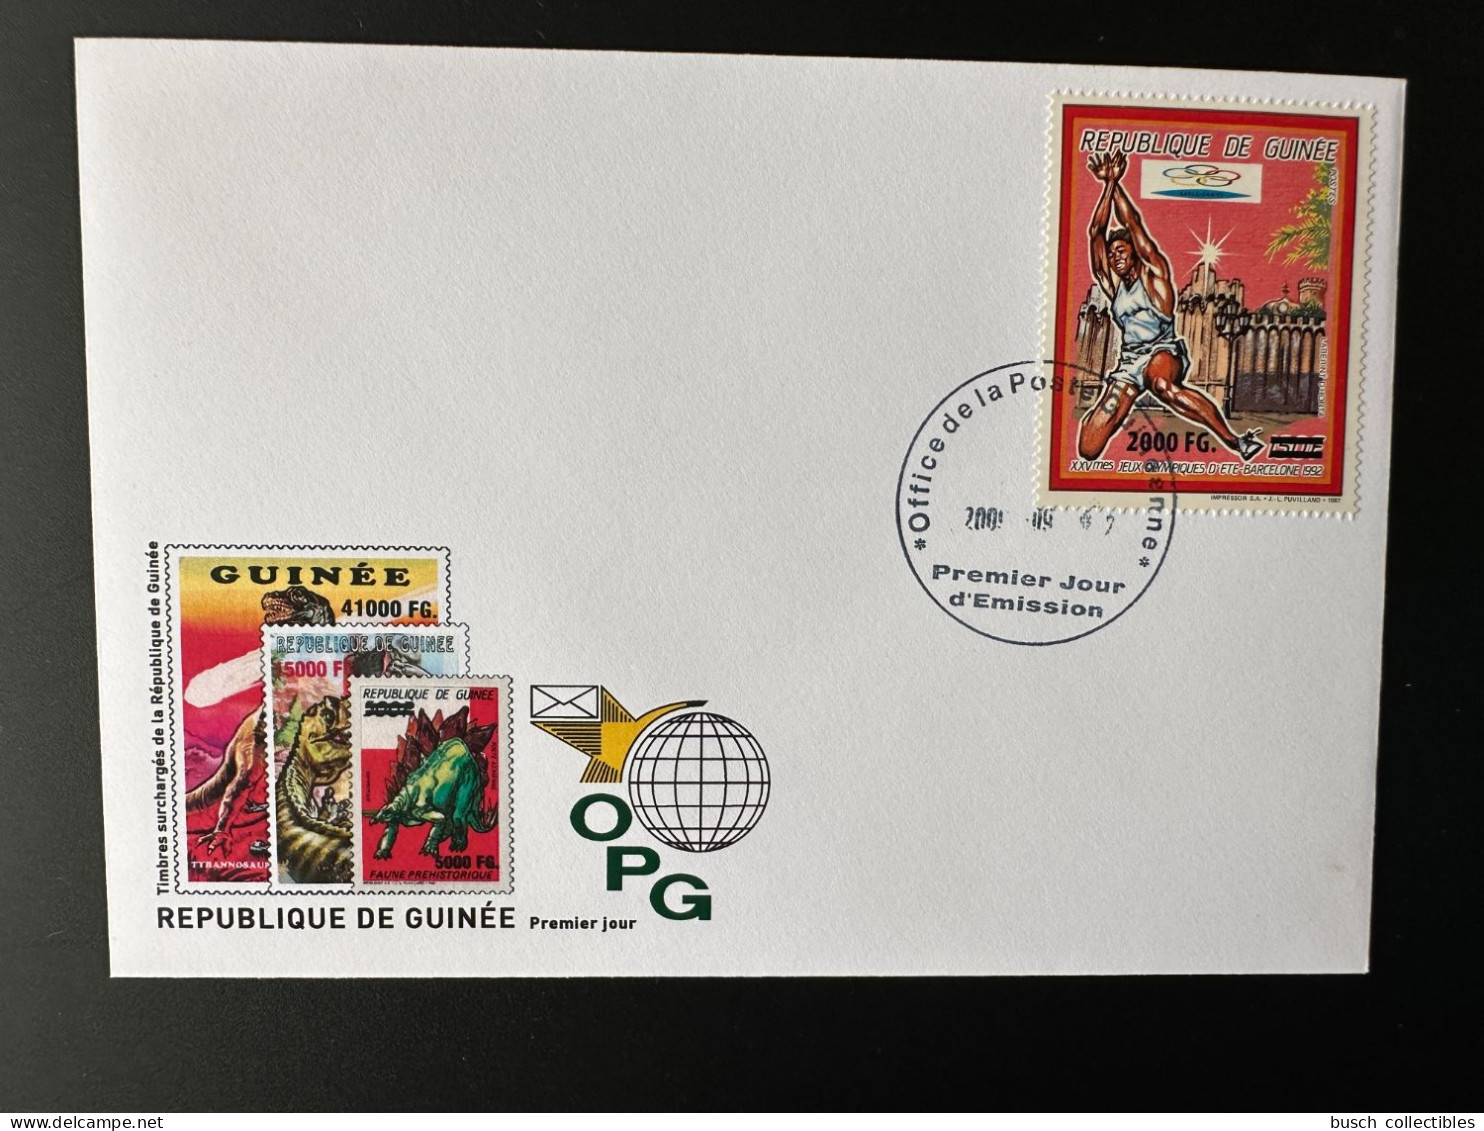 Guinée Guinea 2009 FDC Mi. 6719 Surchargé Overprint Olympic Games Barcelona 1992 Jeux Olympiques Olympia - Sommer 1992: Barcelone